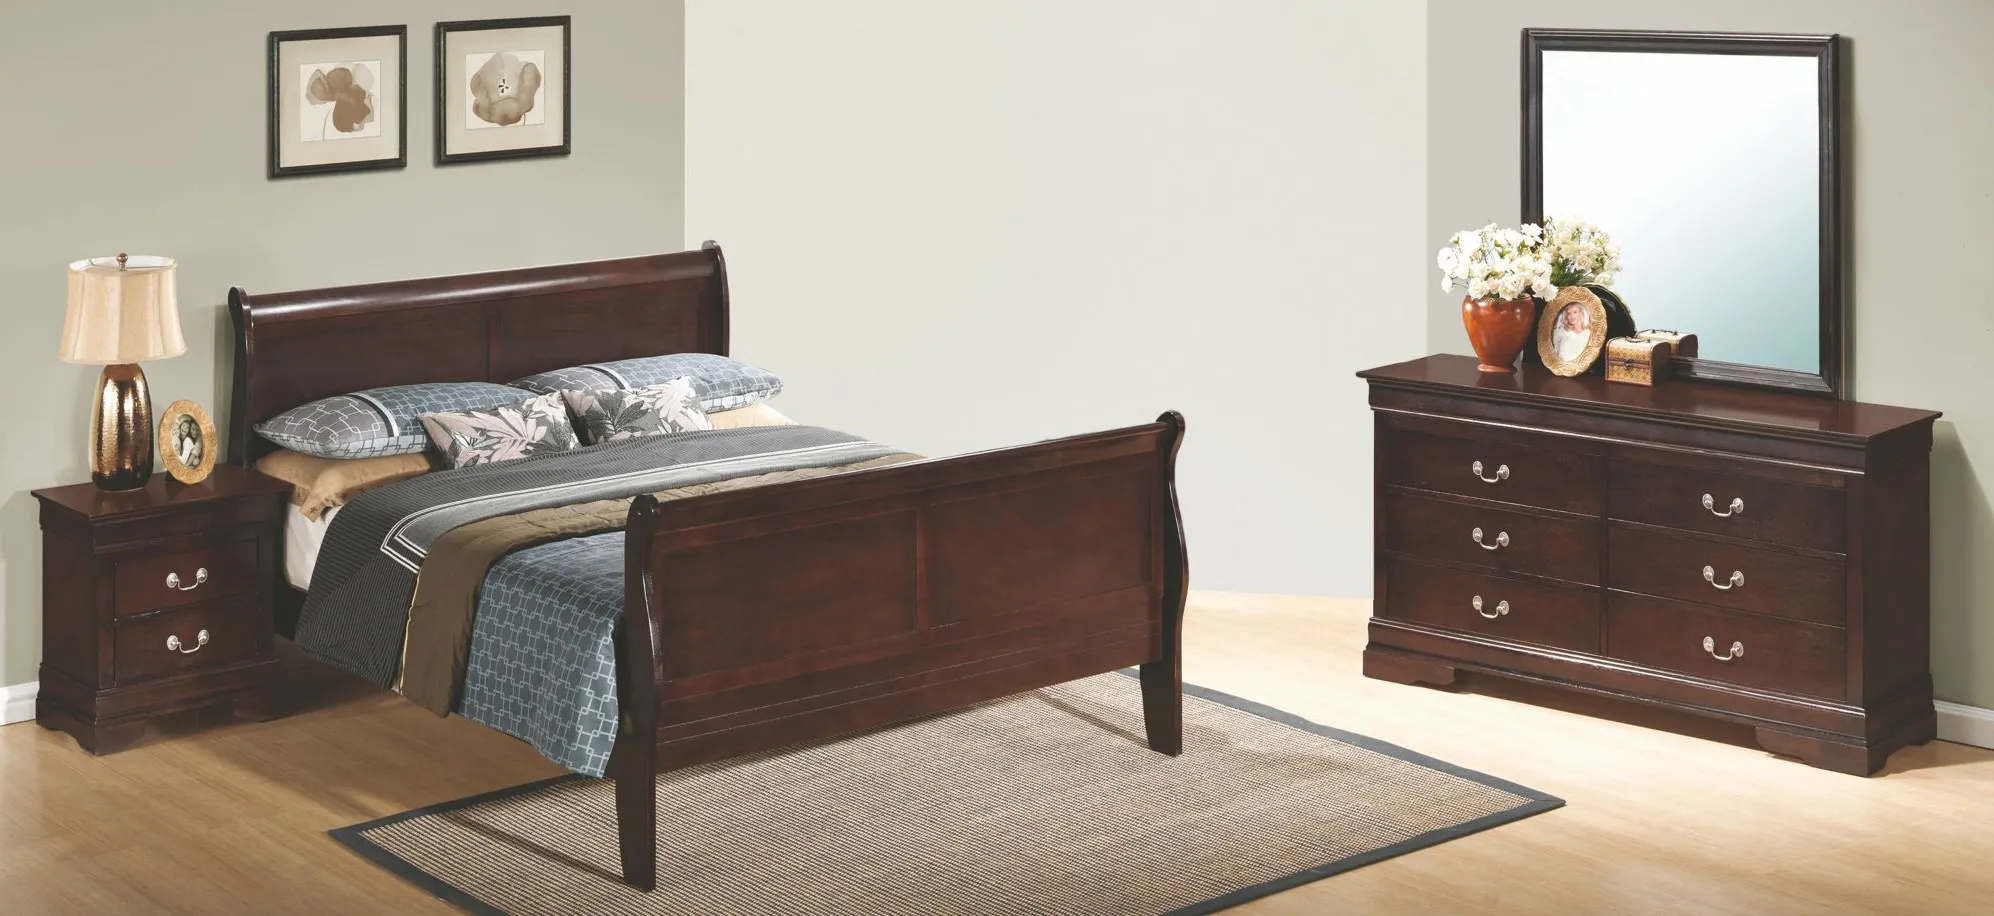 Rossie 4-pc. Bedroom Set in Cappuccino by Glory Furniture